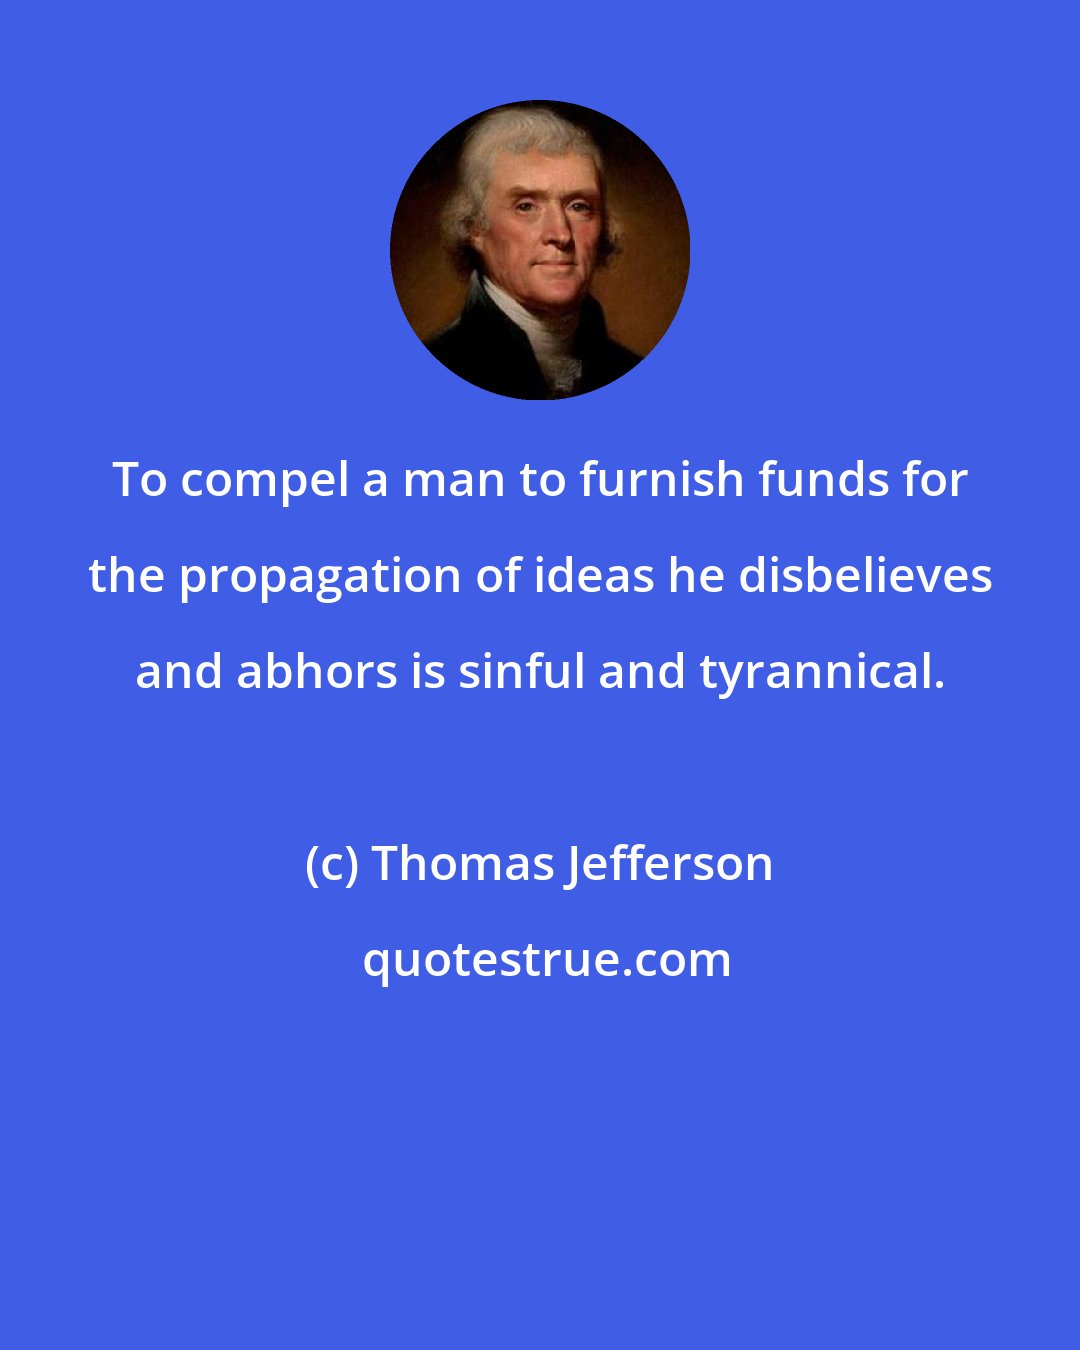 Thomas Jefferson: To compel a man to furnish funds for the propagation of ideas he disbelieves and abhors is sinful and tyrannical.